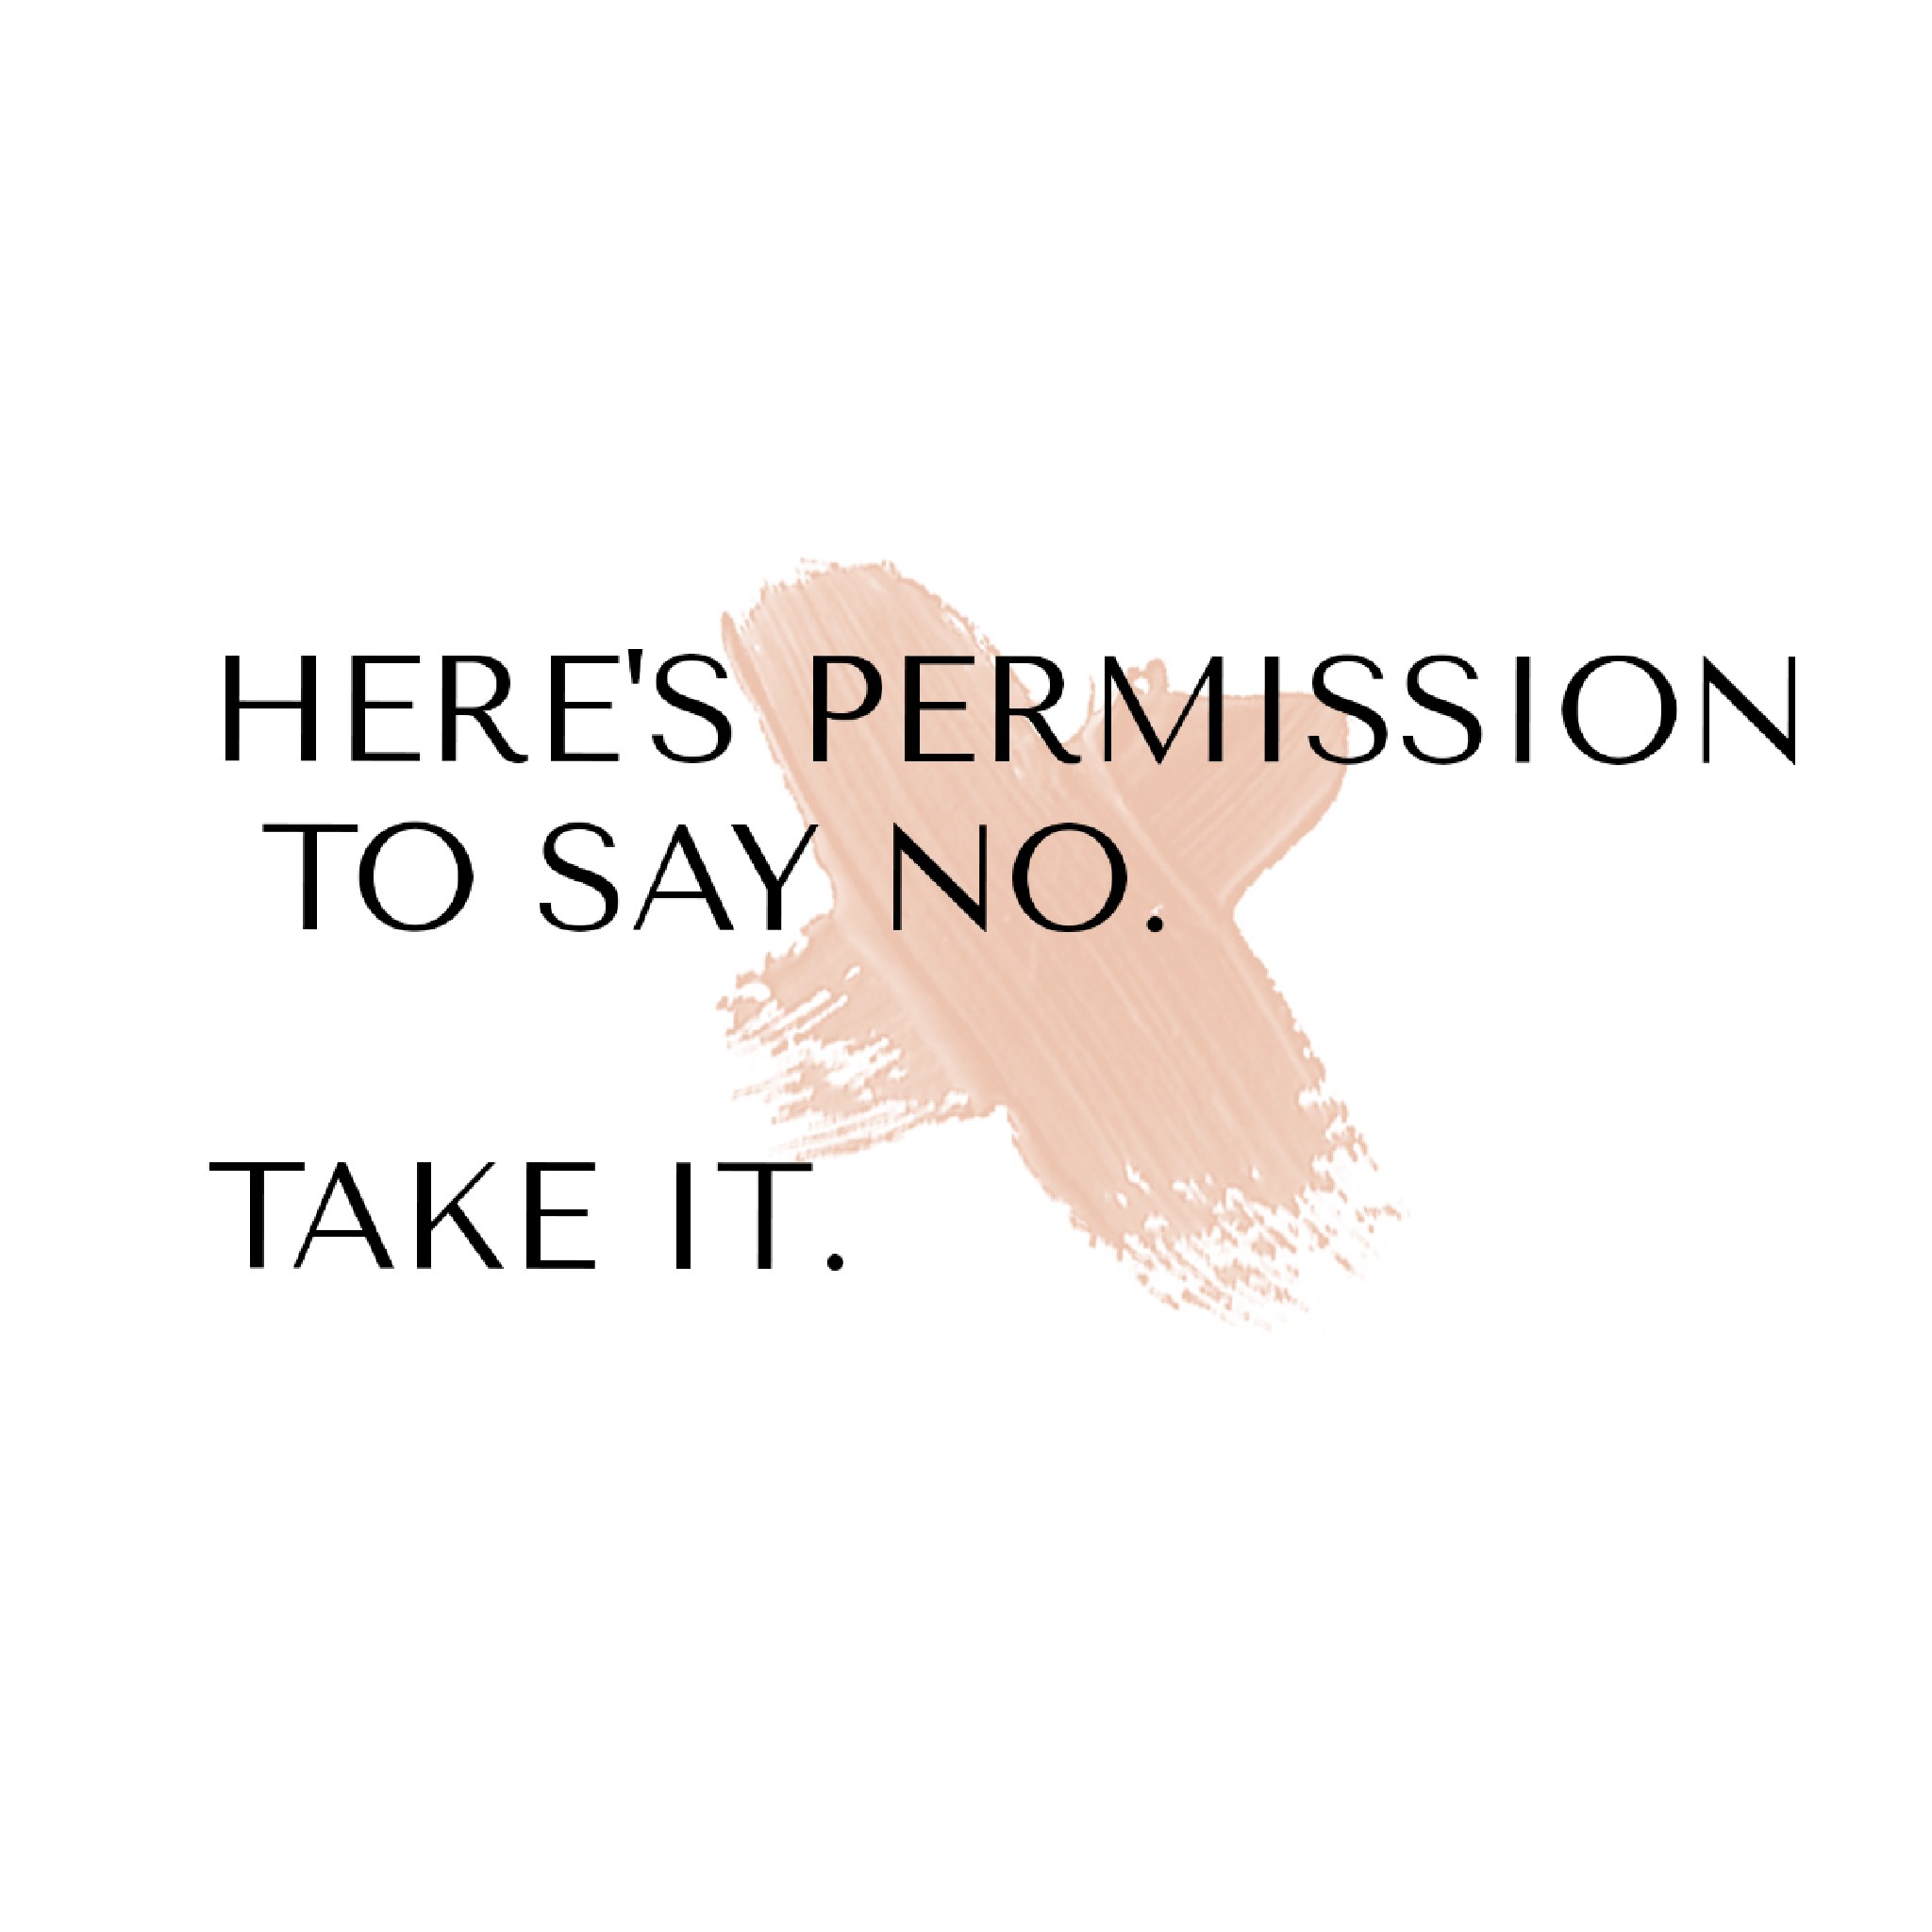 Here's permission to say no. Take it